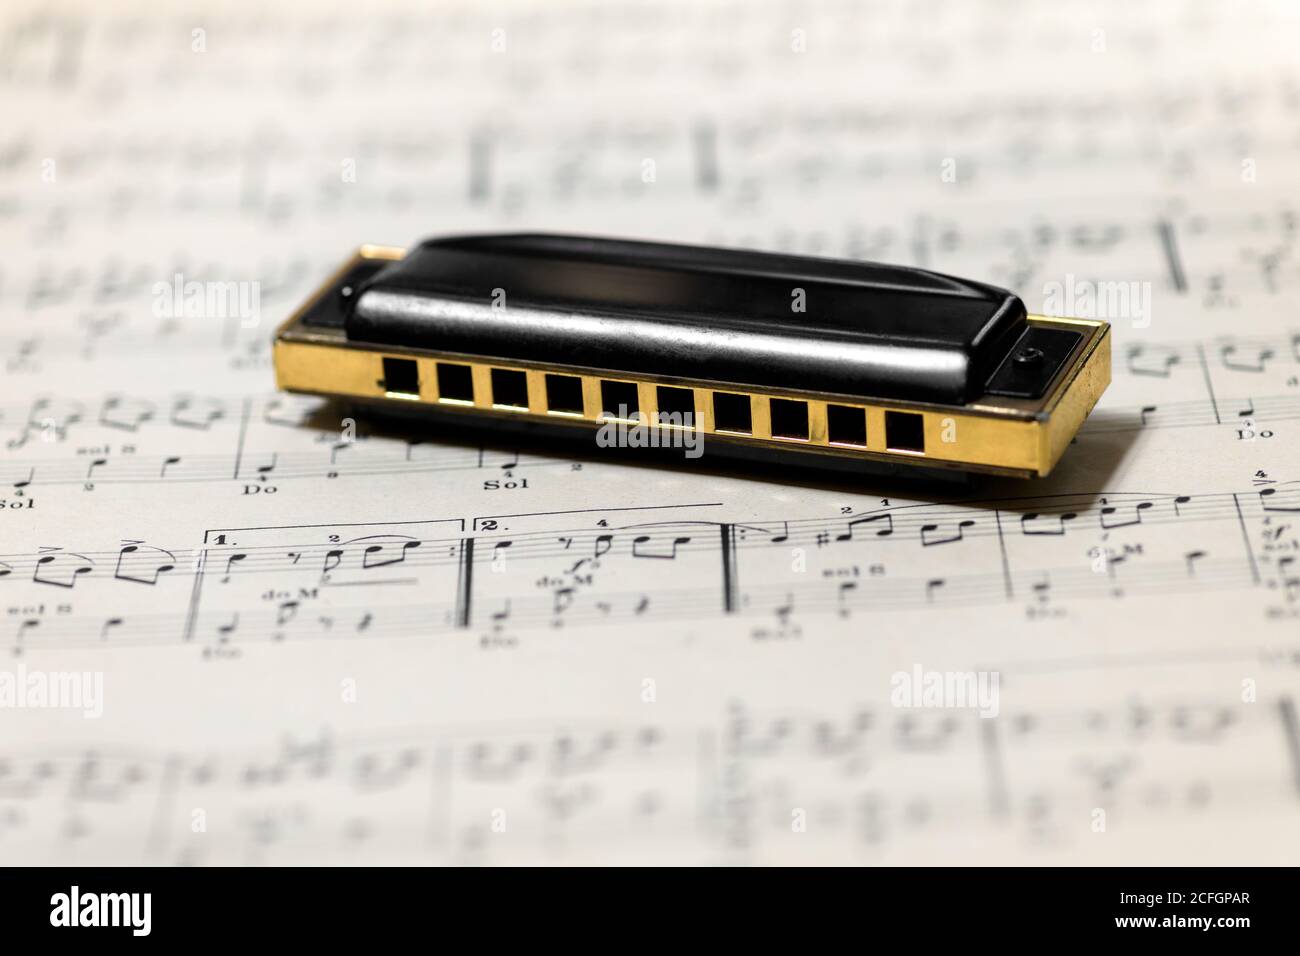 Mouth organ or harmonica on a music score or sheet music with selective  focus to the musical instrument and copyspace Stock Photo - Alamy